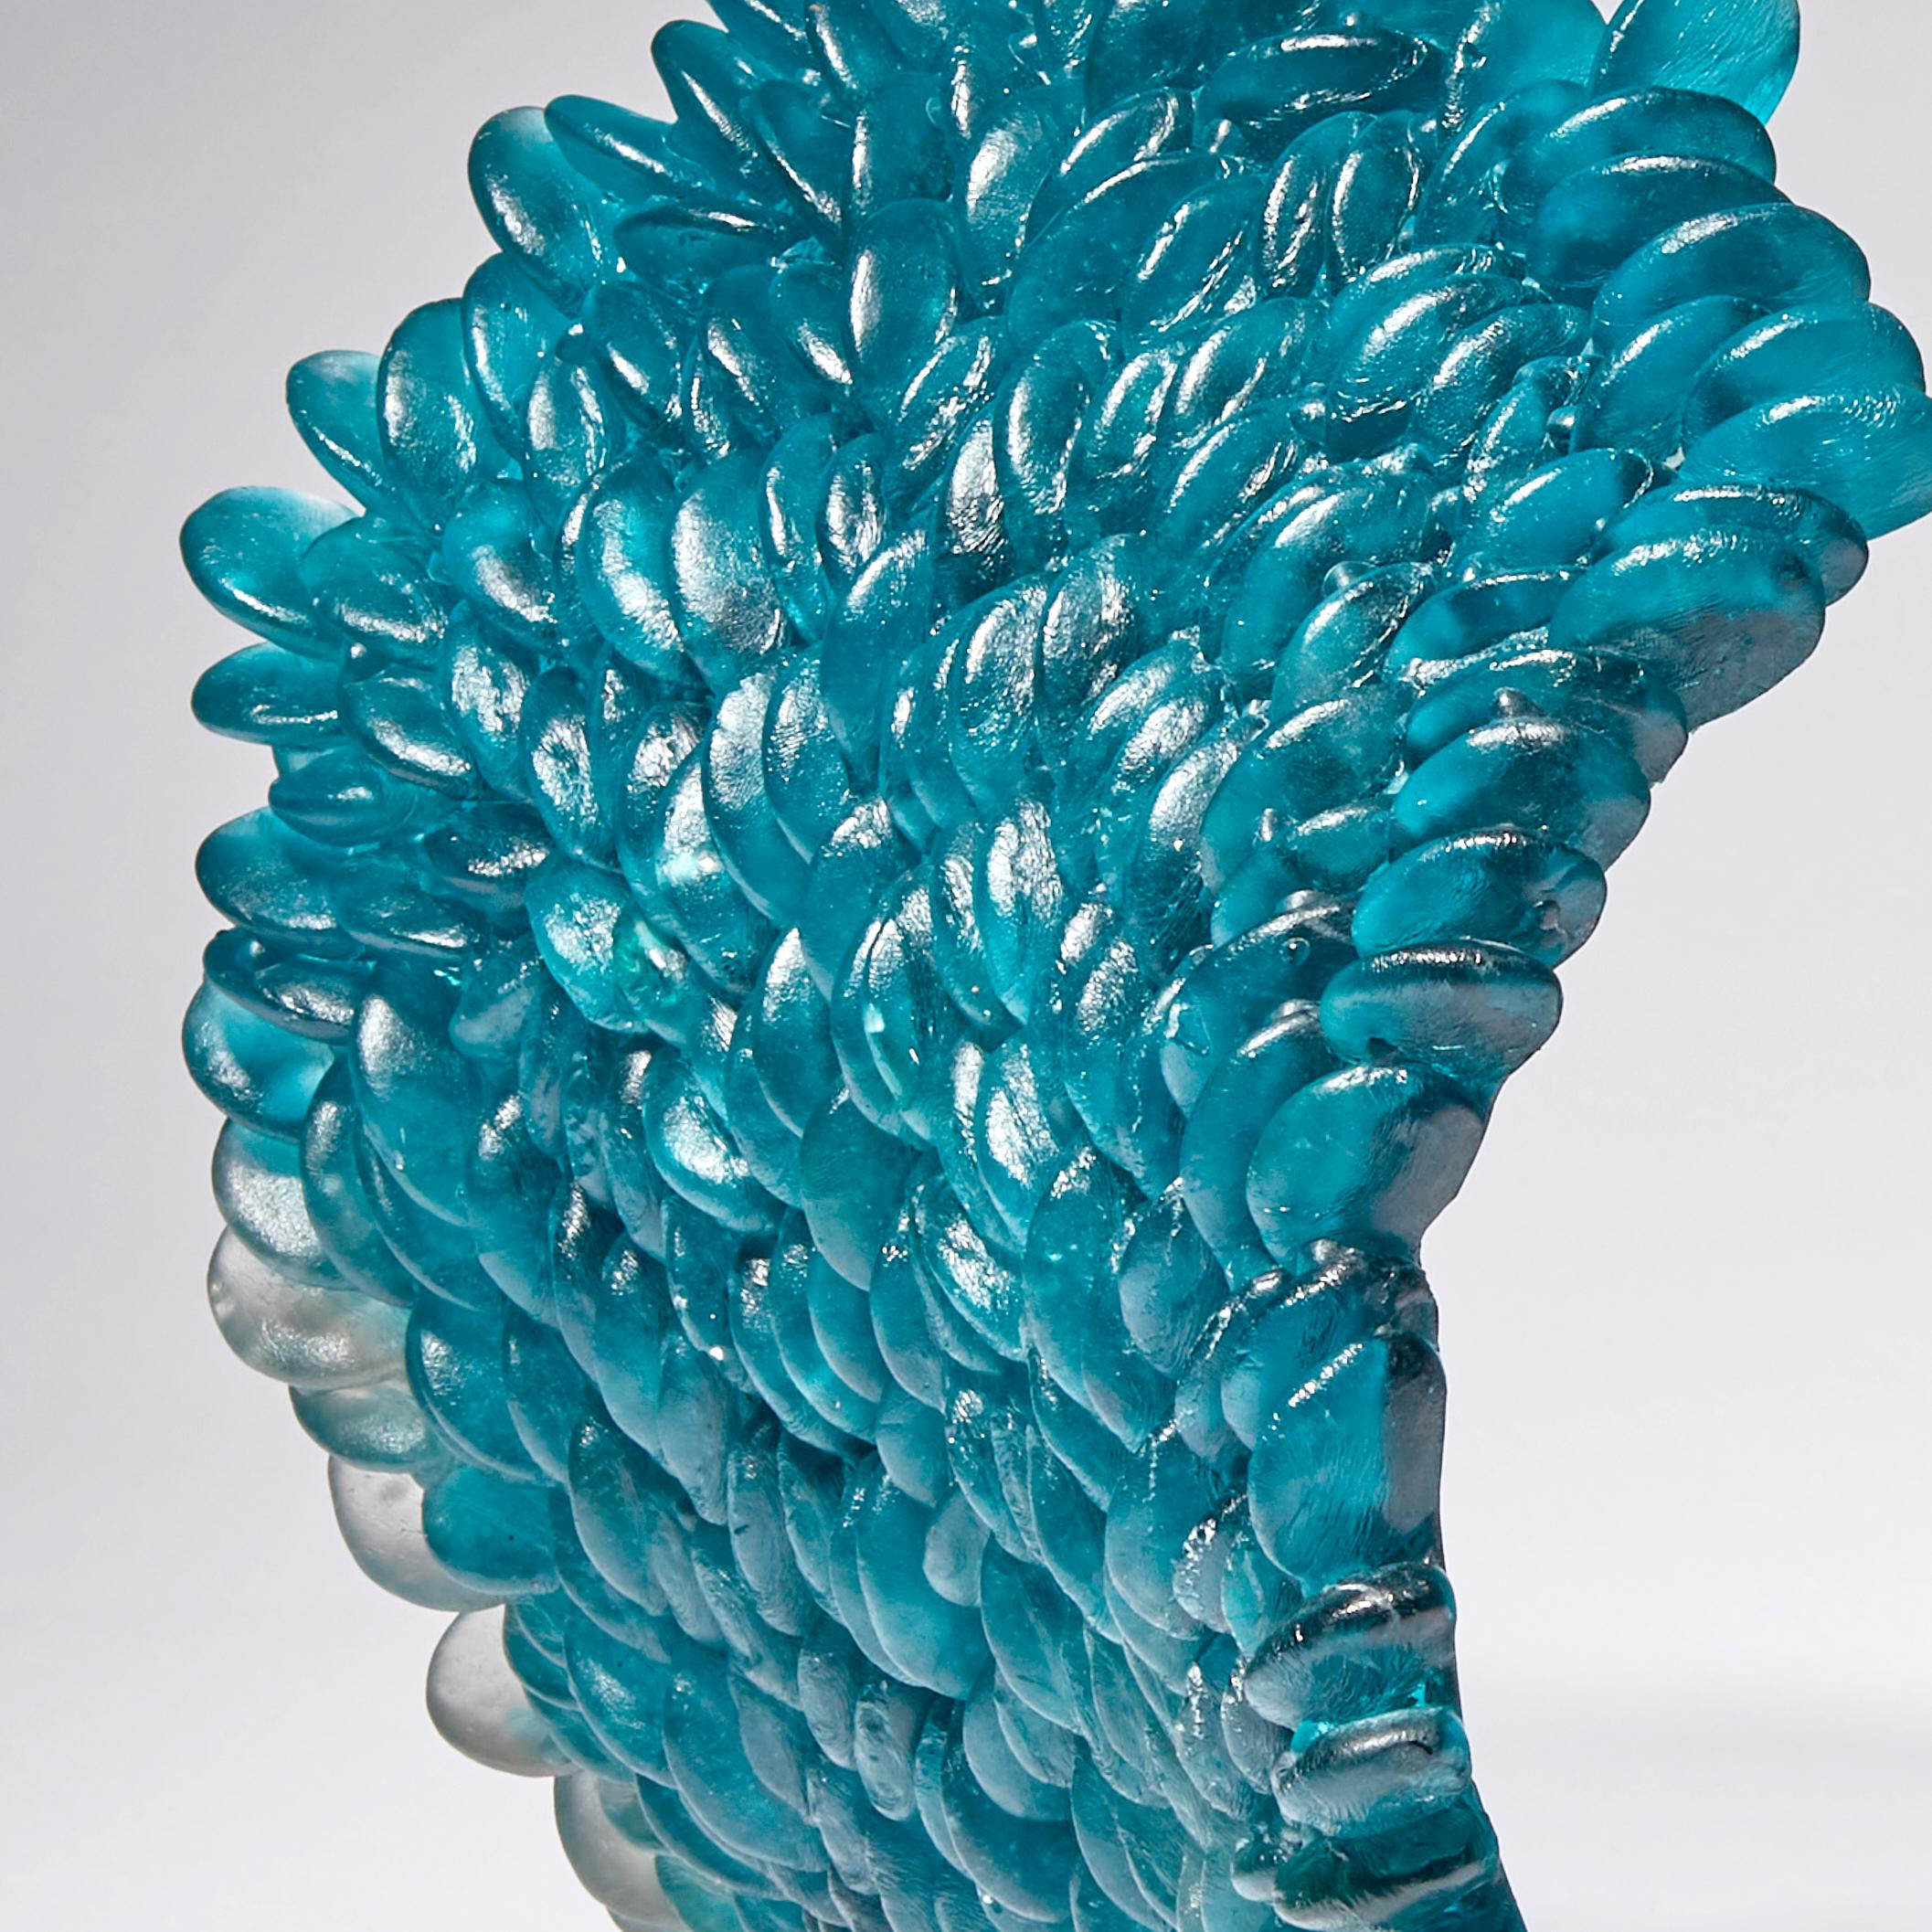 British Curled Over V, a Unique Glass Sculpture in Teal & Grey by Nina Casson McGarva